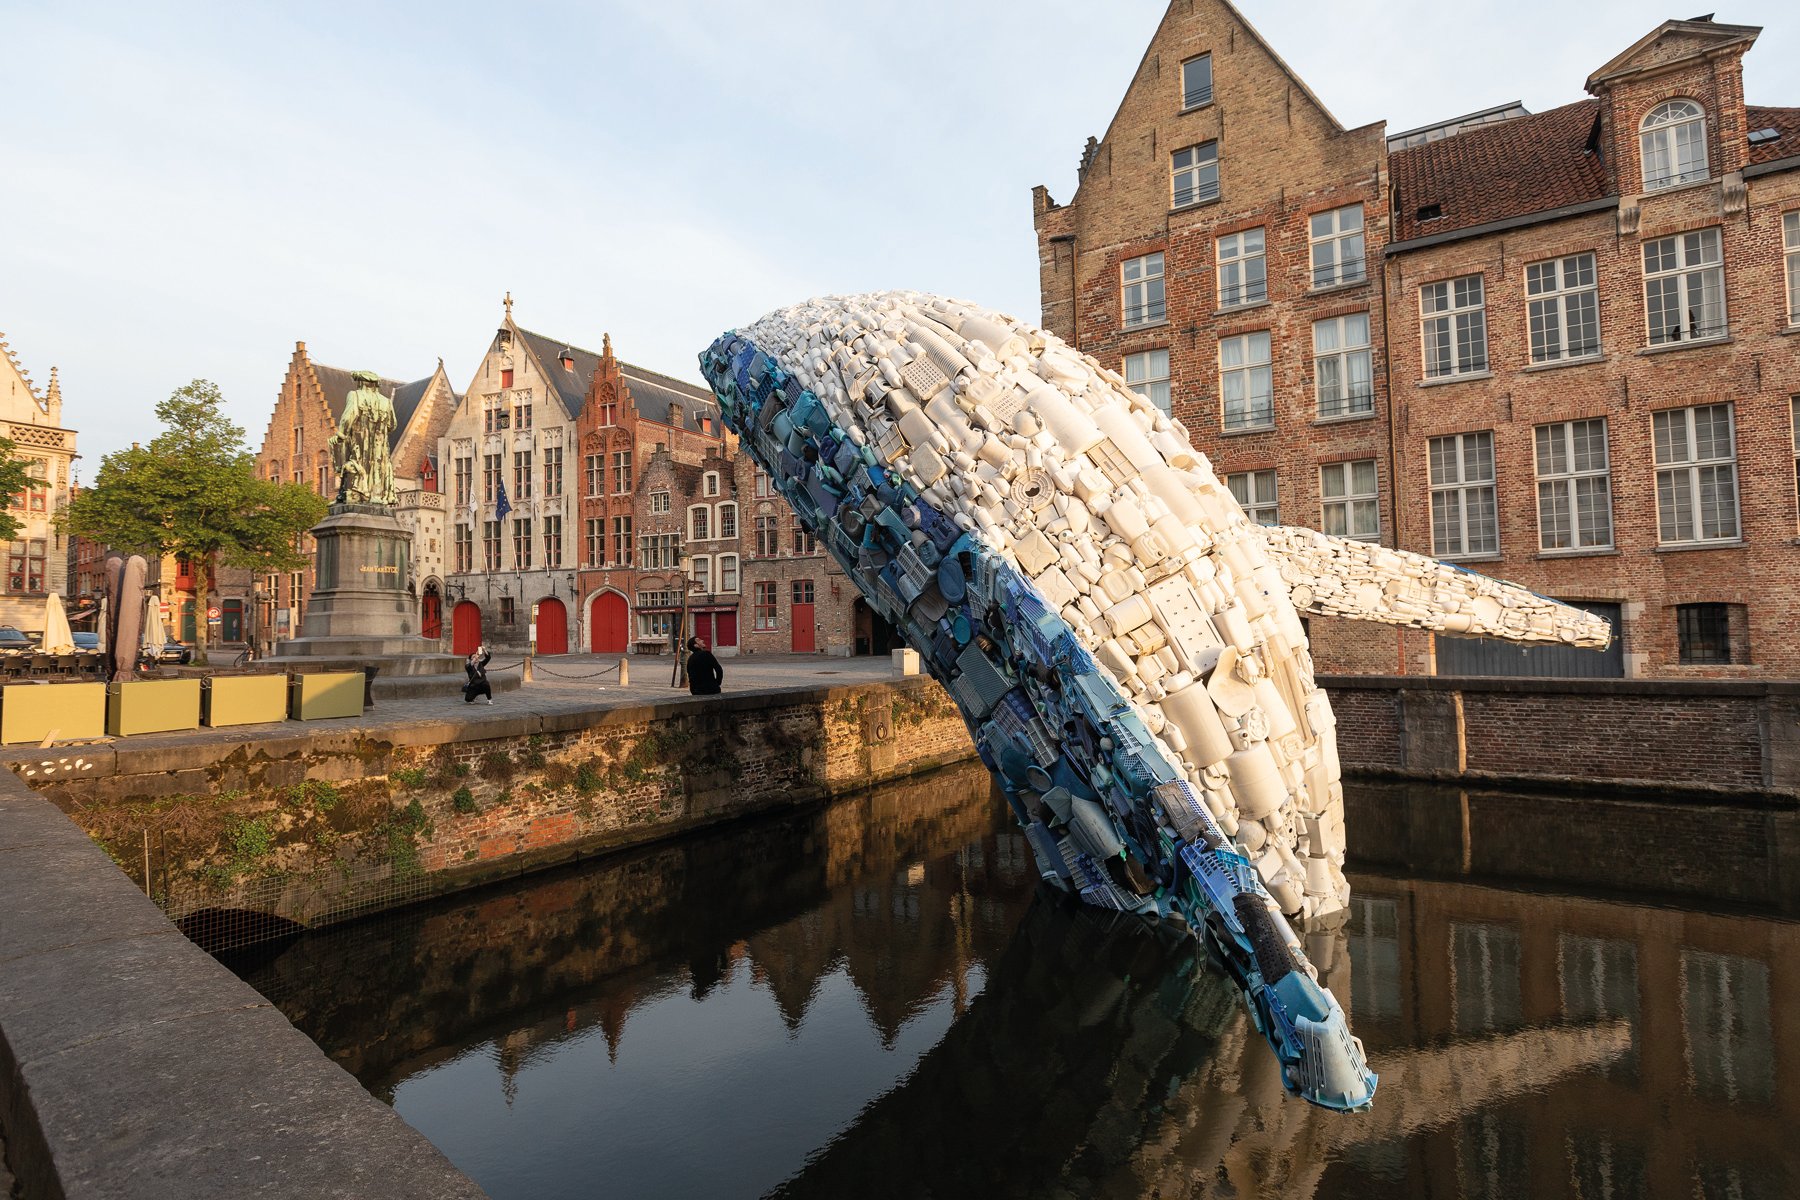 Large red and yellow cocoon installation, floating on water with locks, VLOEIBARE STAD LIQUID CITY, in red font, TRIENNALE BRUGGES 2018 on white border